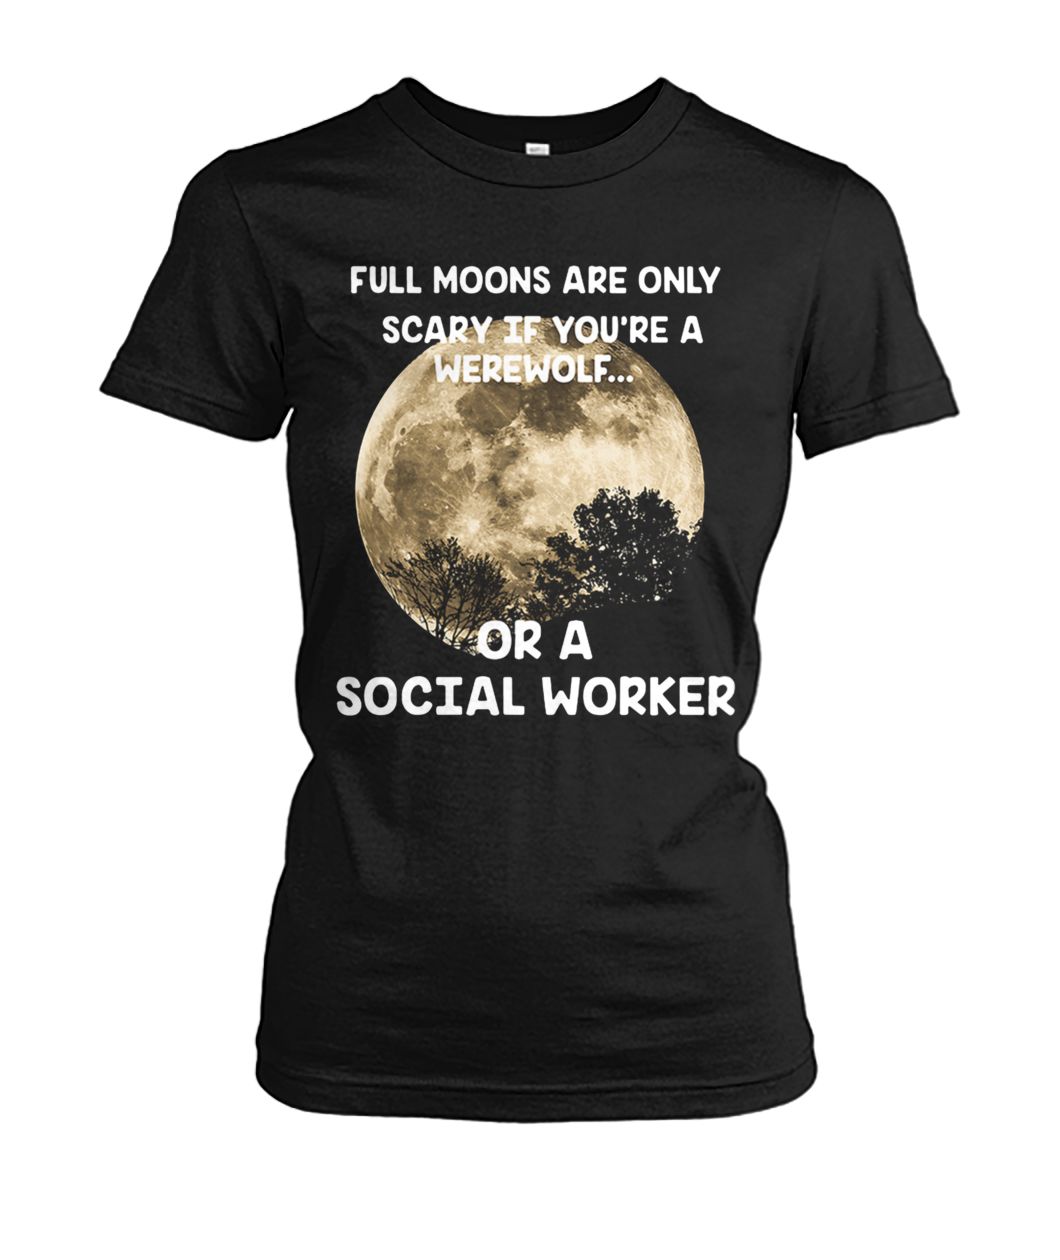 Full moons are only scary if you’re a werewolf or a social worker women's crew tee